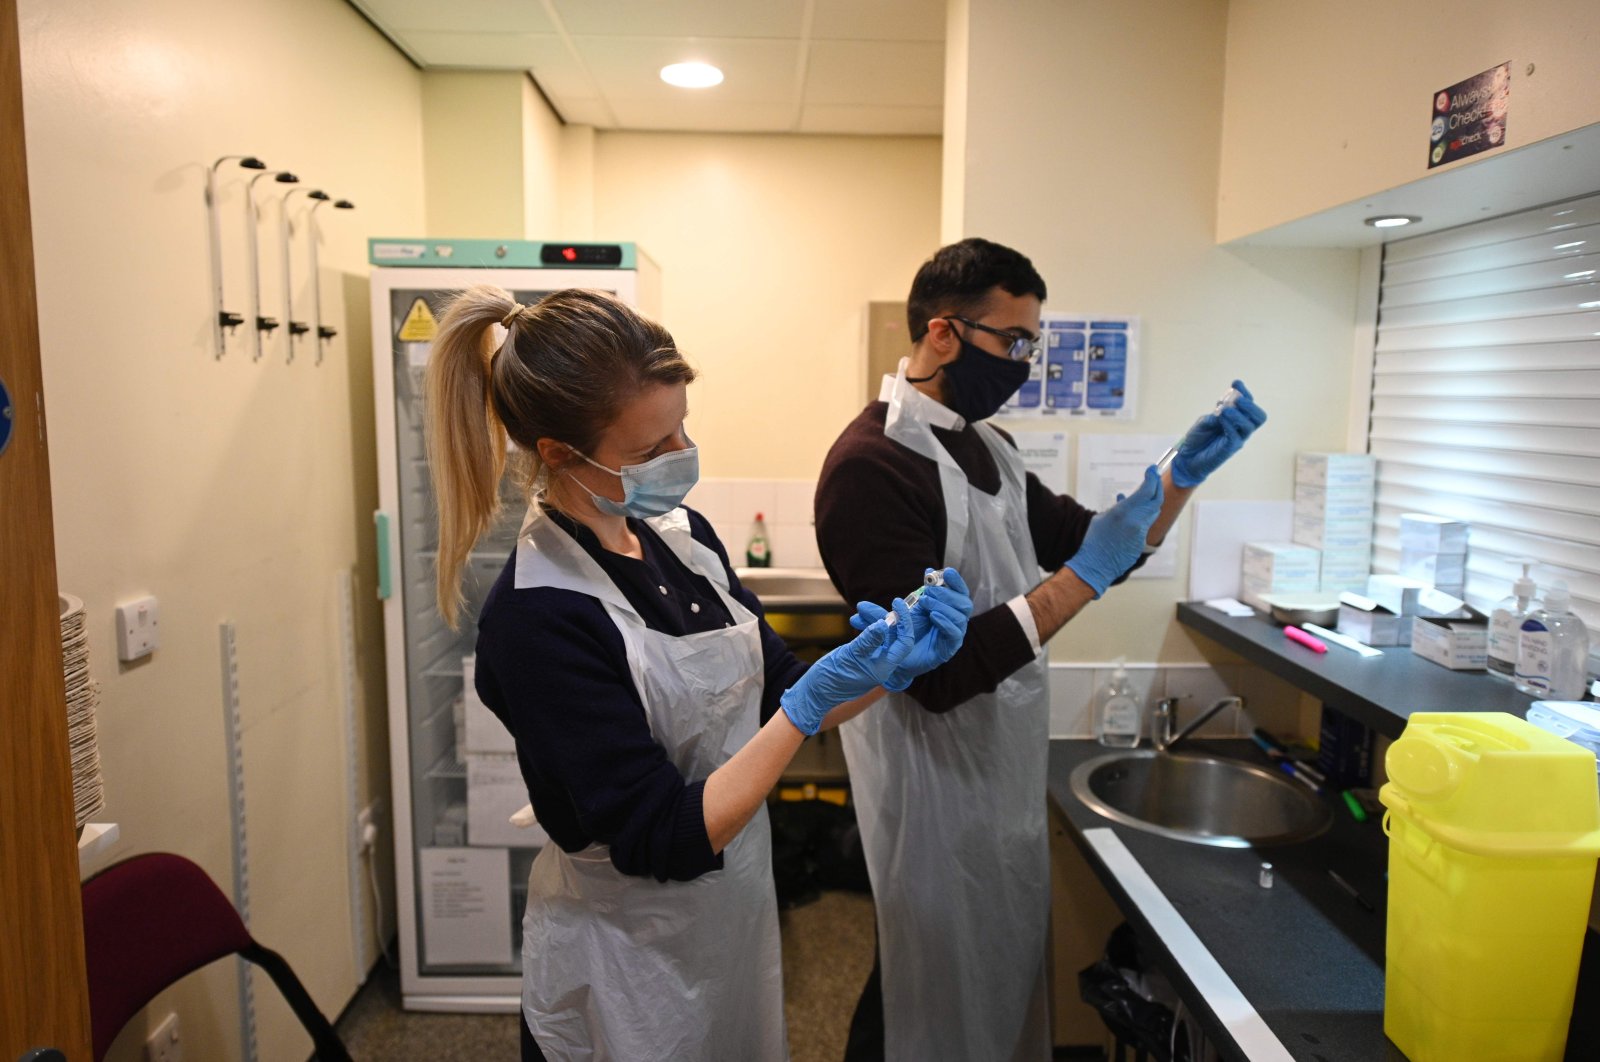 Pharmacist Naeem Khazee (R) and nurse Jocie Walsh (L) dilute vials of the Pfizer-BioNTech COVID-19 vaccine before doses are drawn to be administered at a vaccination center set up at Thornton Little Theatre managed by Wyre Council in Thornton-Cleveleys, northwest England, Jan. 29, 2021. (AFP Photo)